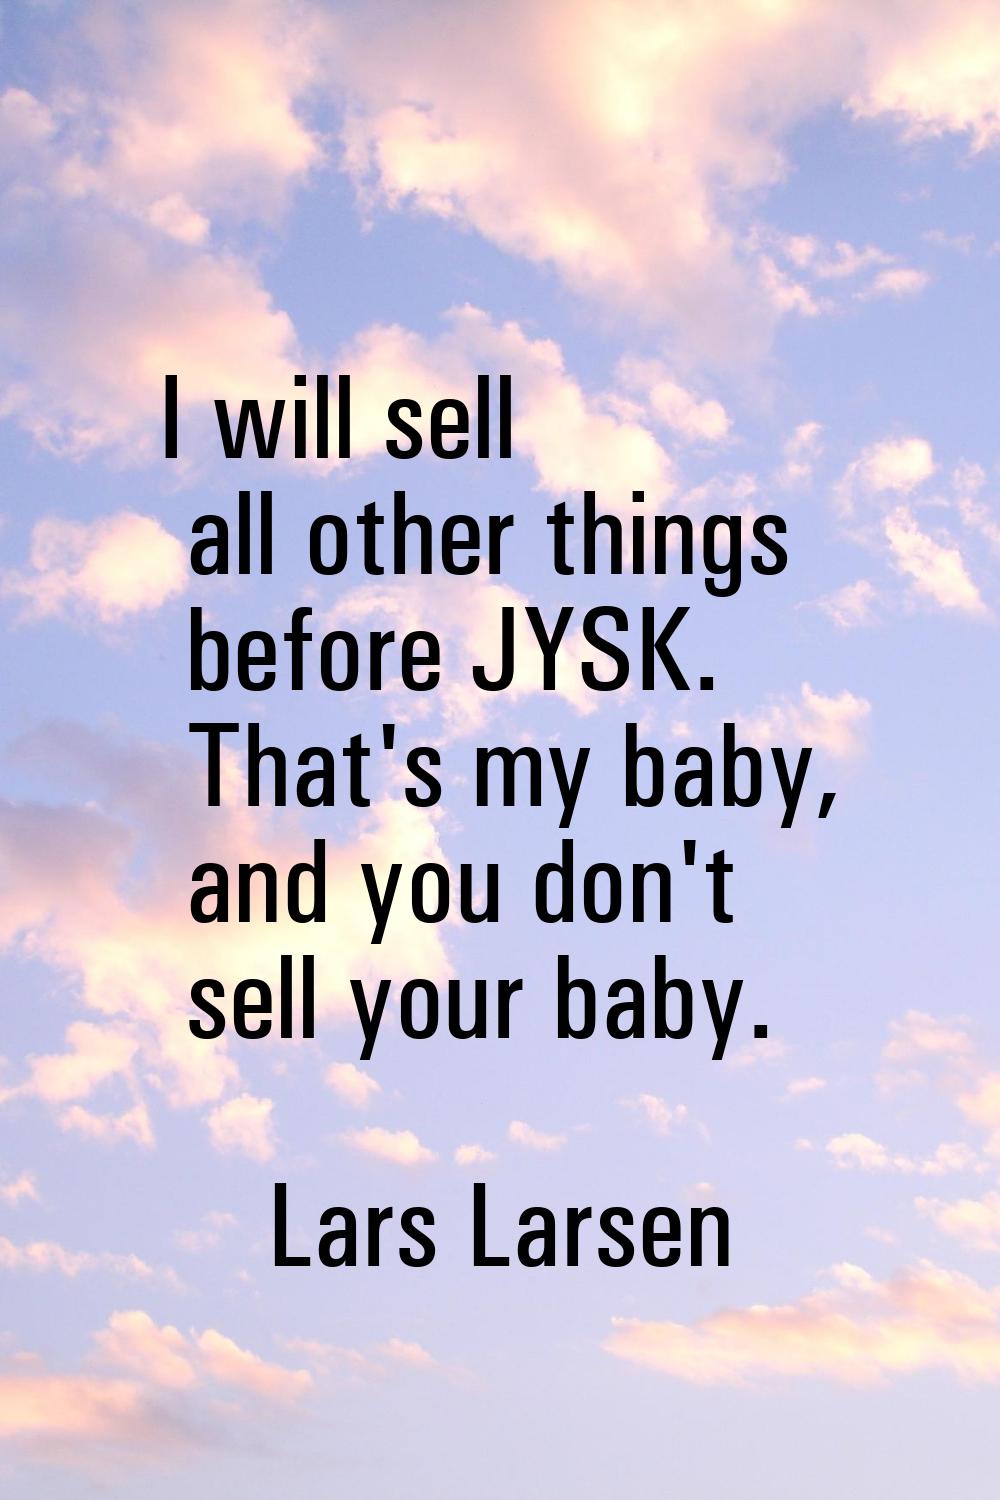 I will sell all other things before JYSK. That's my baby, and you don't sell your baby.